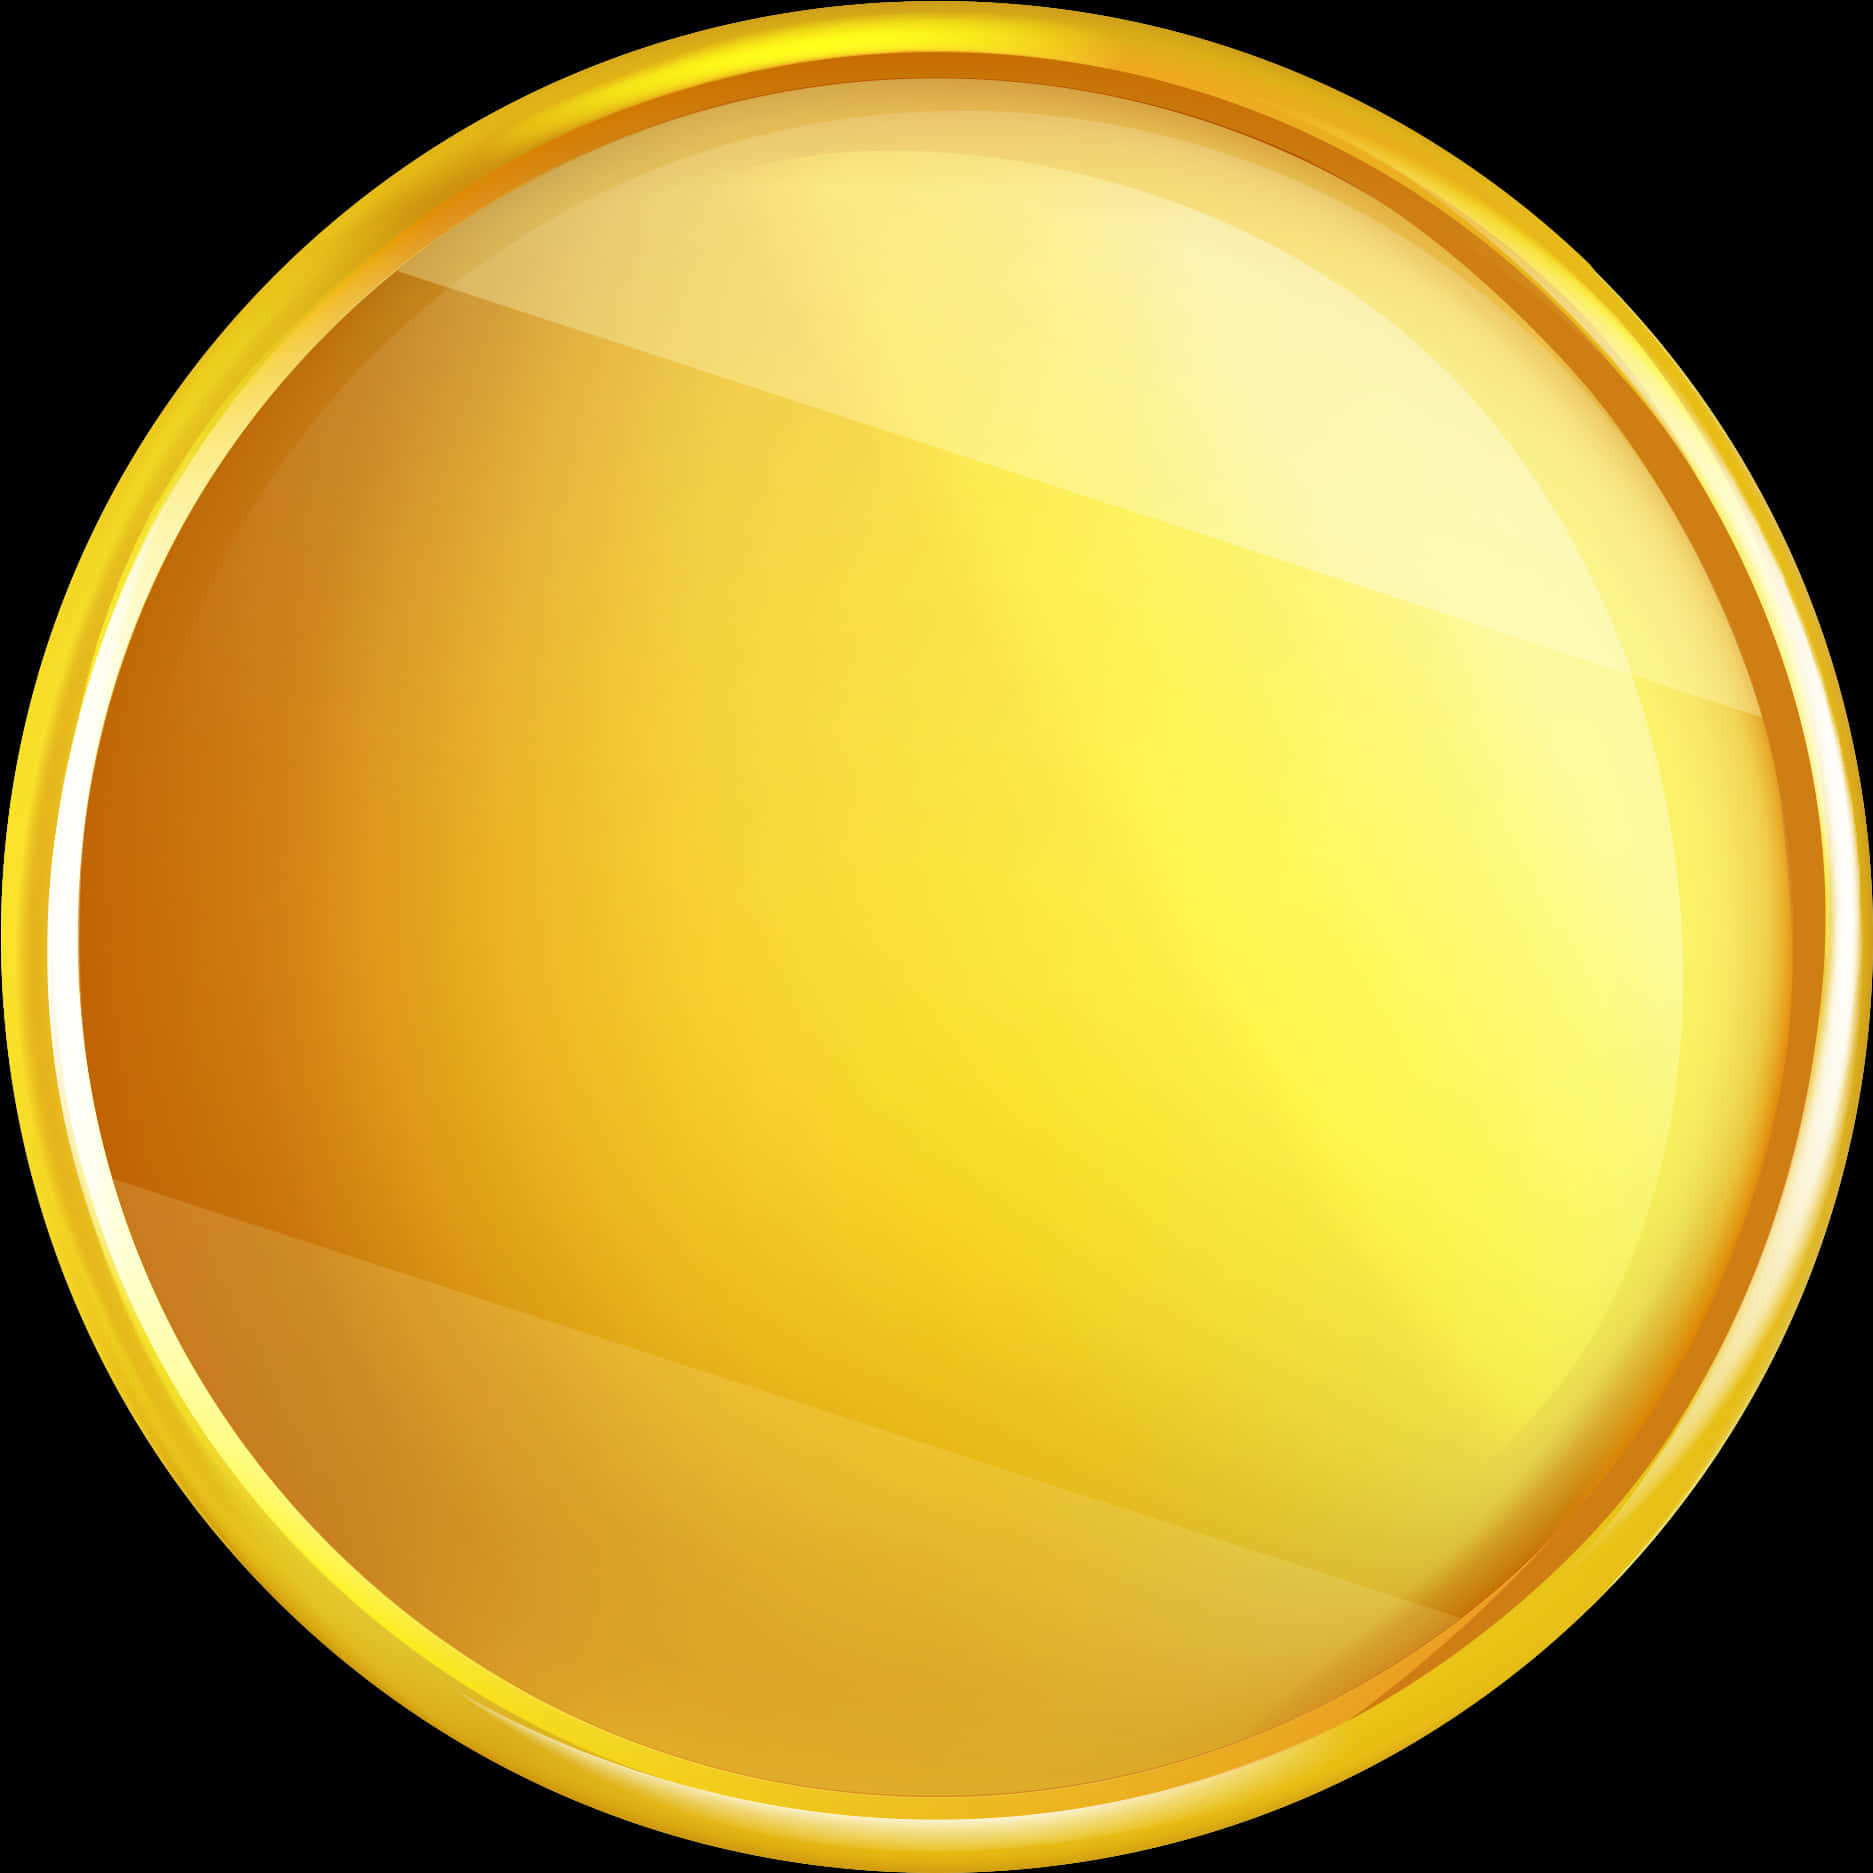 A Yellow Circle With A Black Background